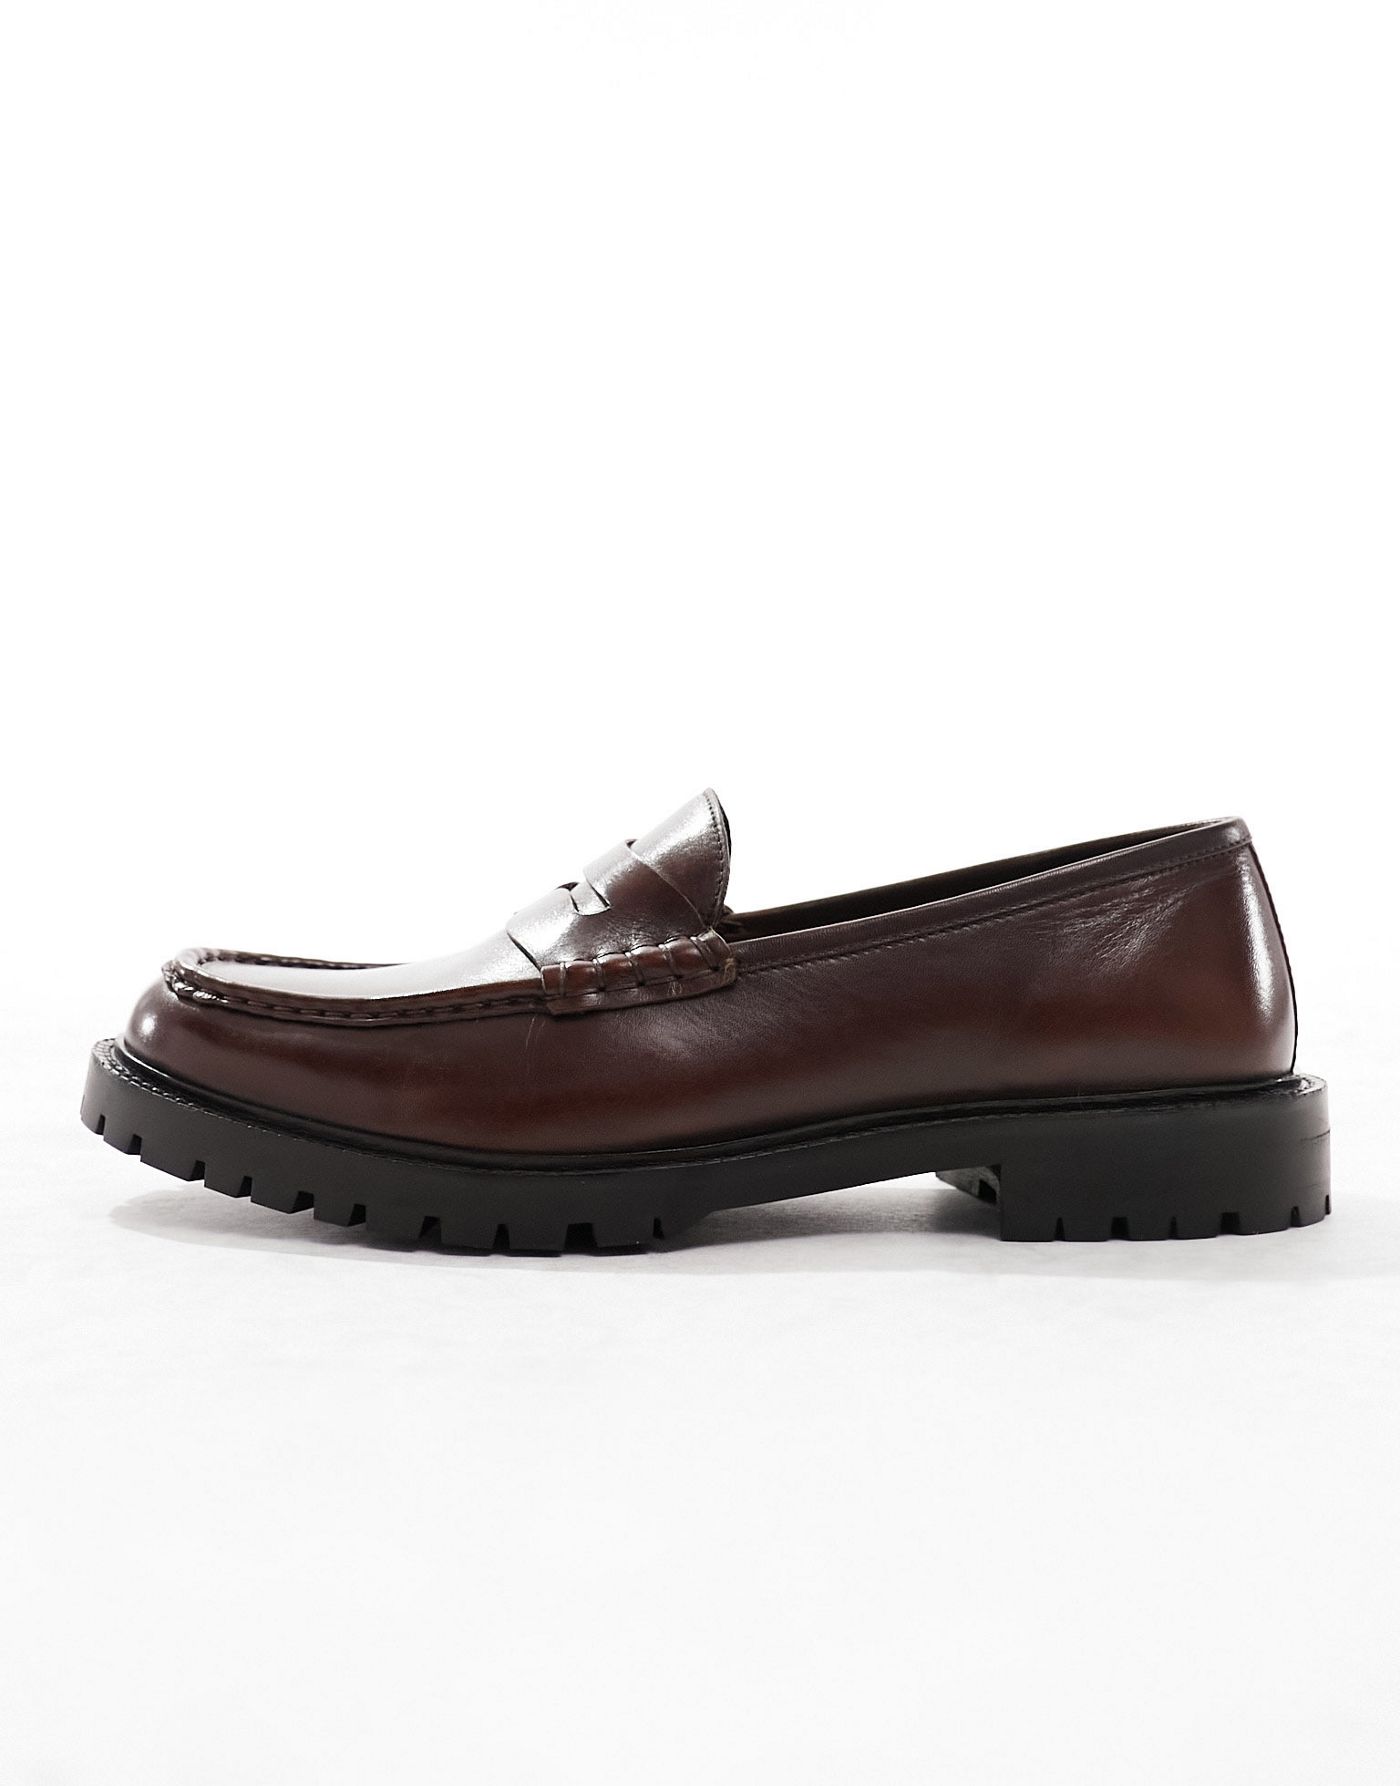 Walk London Campus loafers in brown leather